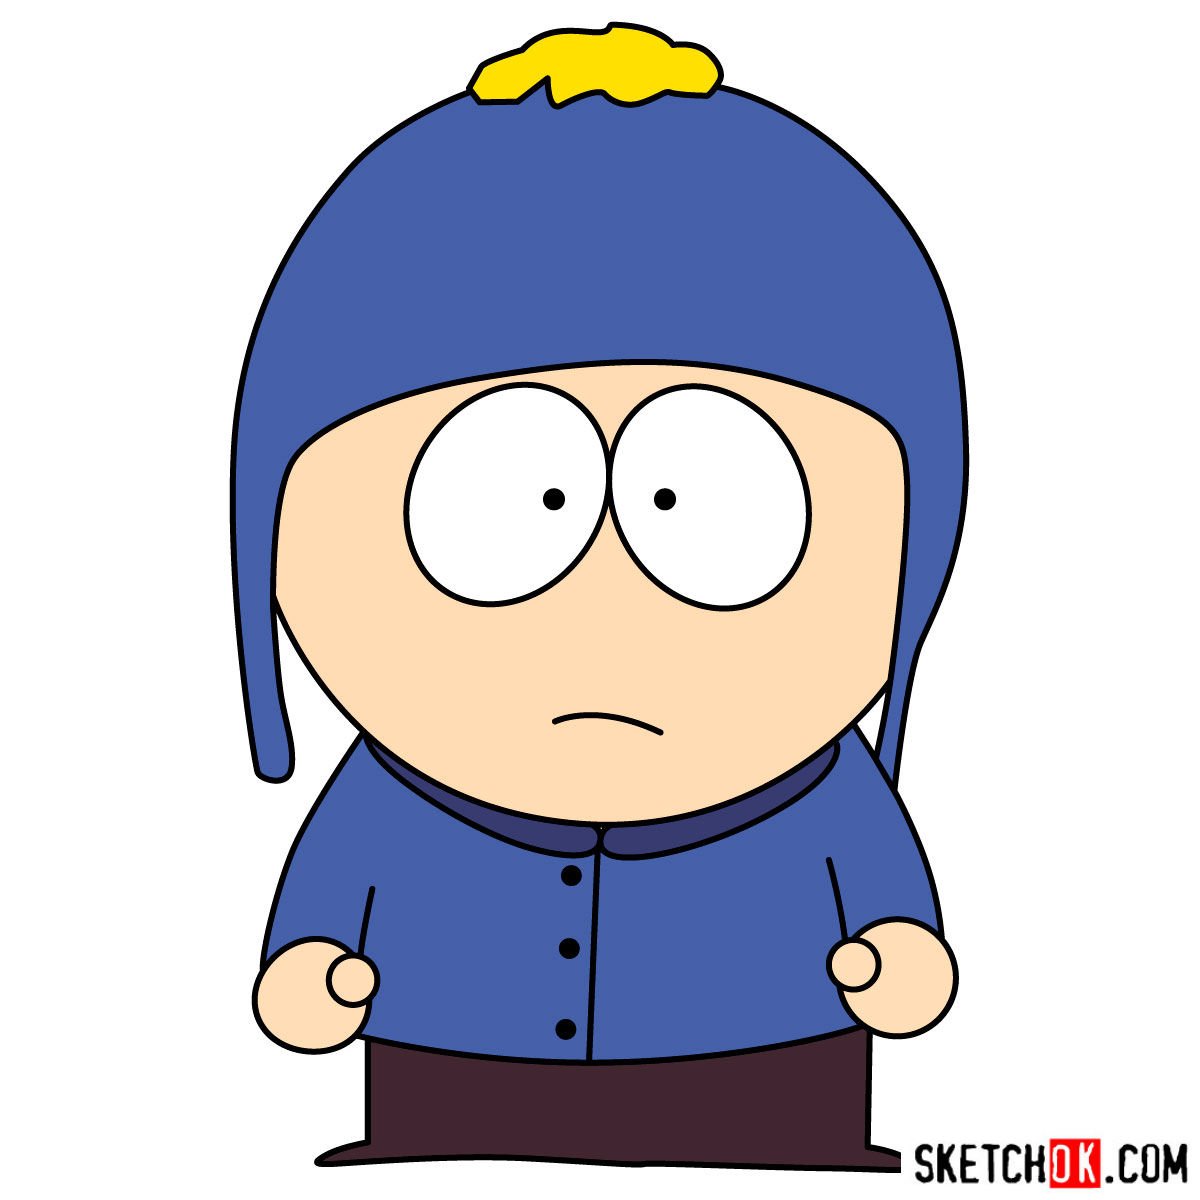 How to draw Craig Tucker from South Park Sketchok easy